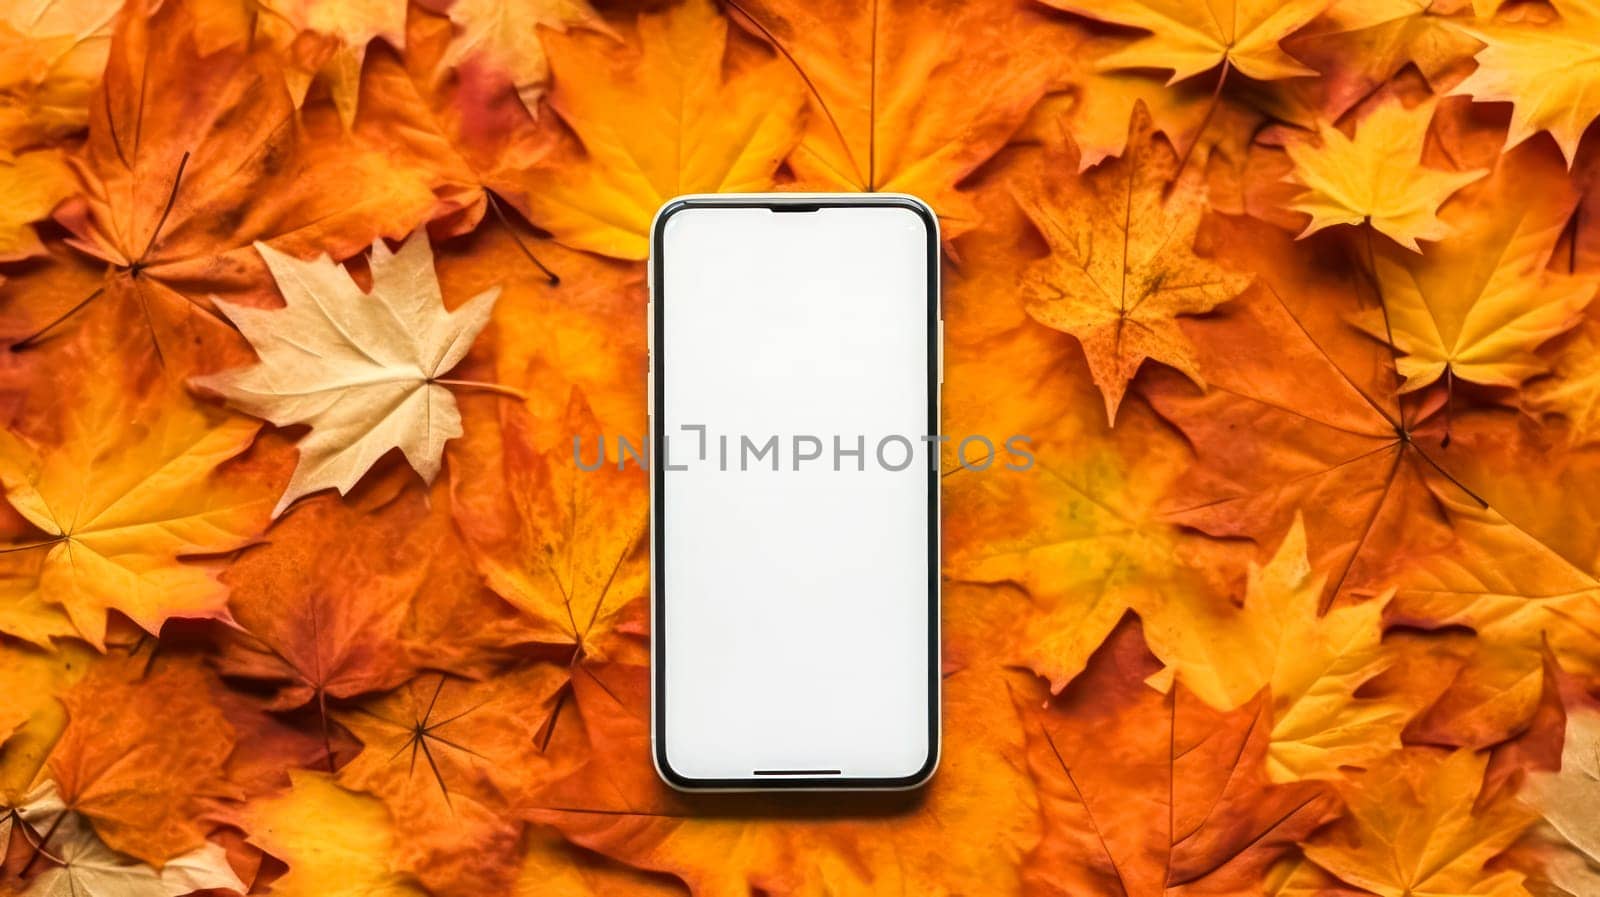 Mockup of a phone with a blank white screen by Alla_Morozova93